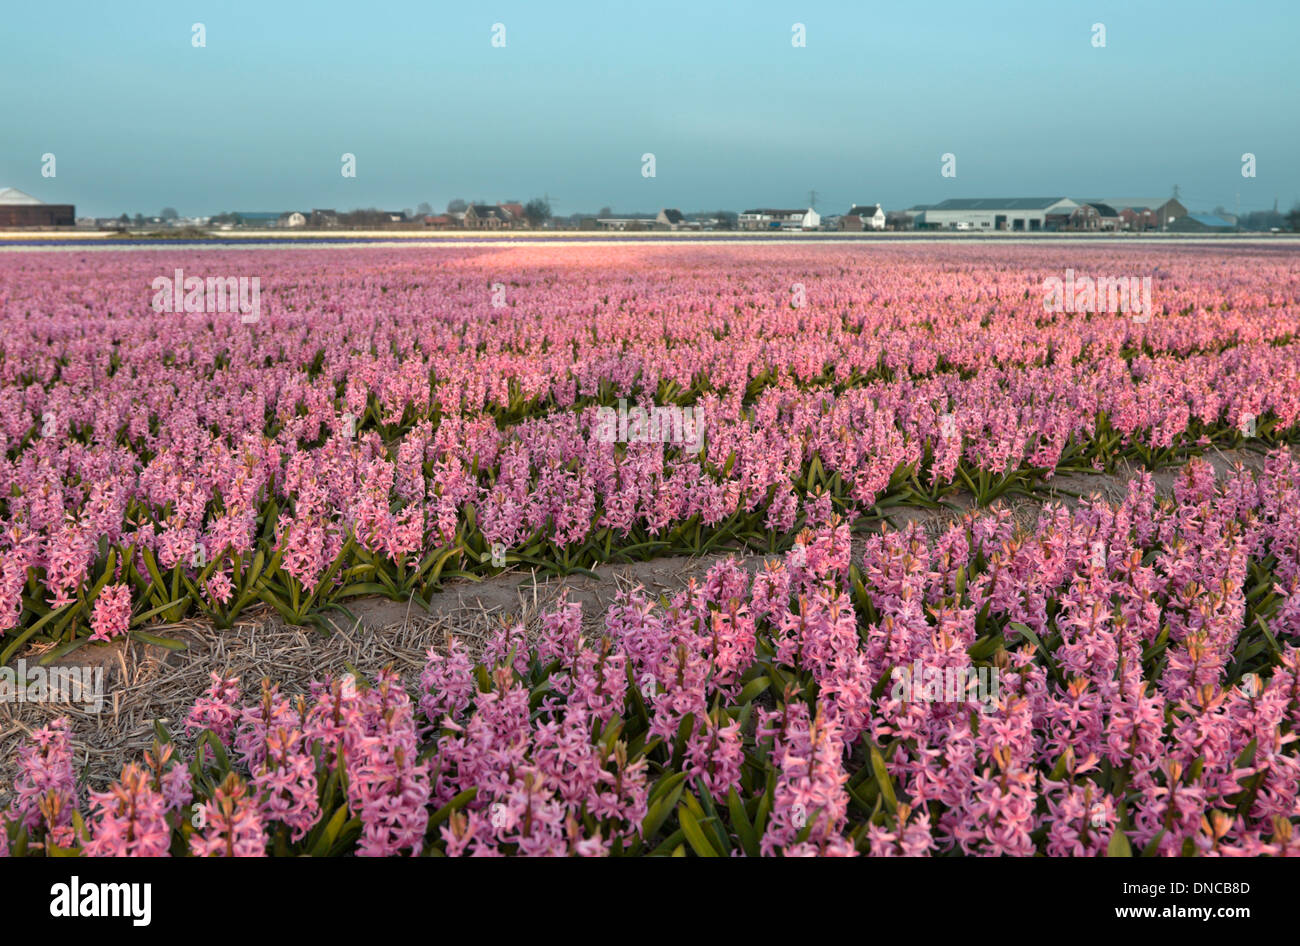 Pink hyacinths blooming at full peak, catching the light of the setting sun, Sassenheim, South Holland, The Netherlands. Stock Photo